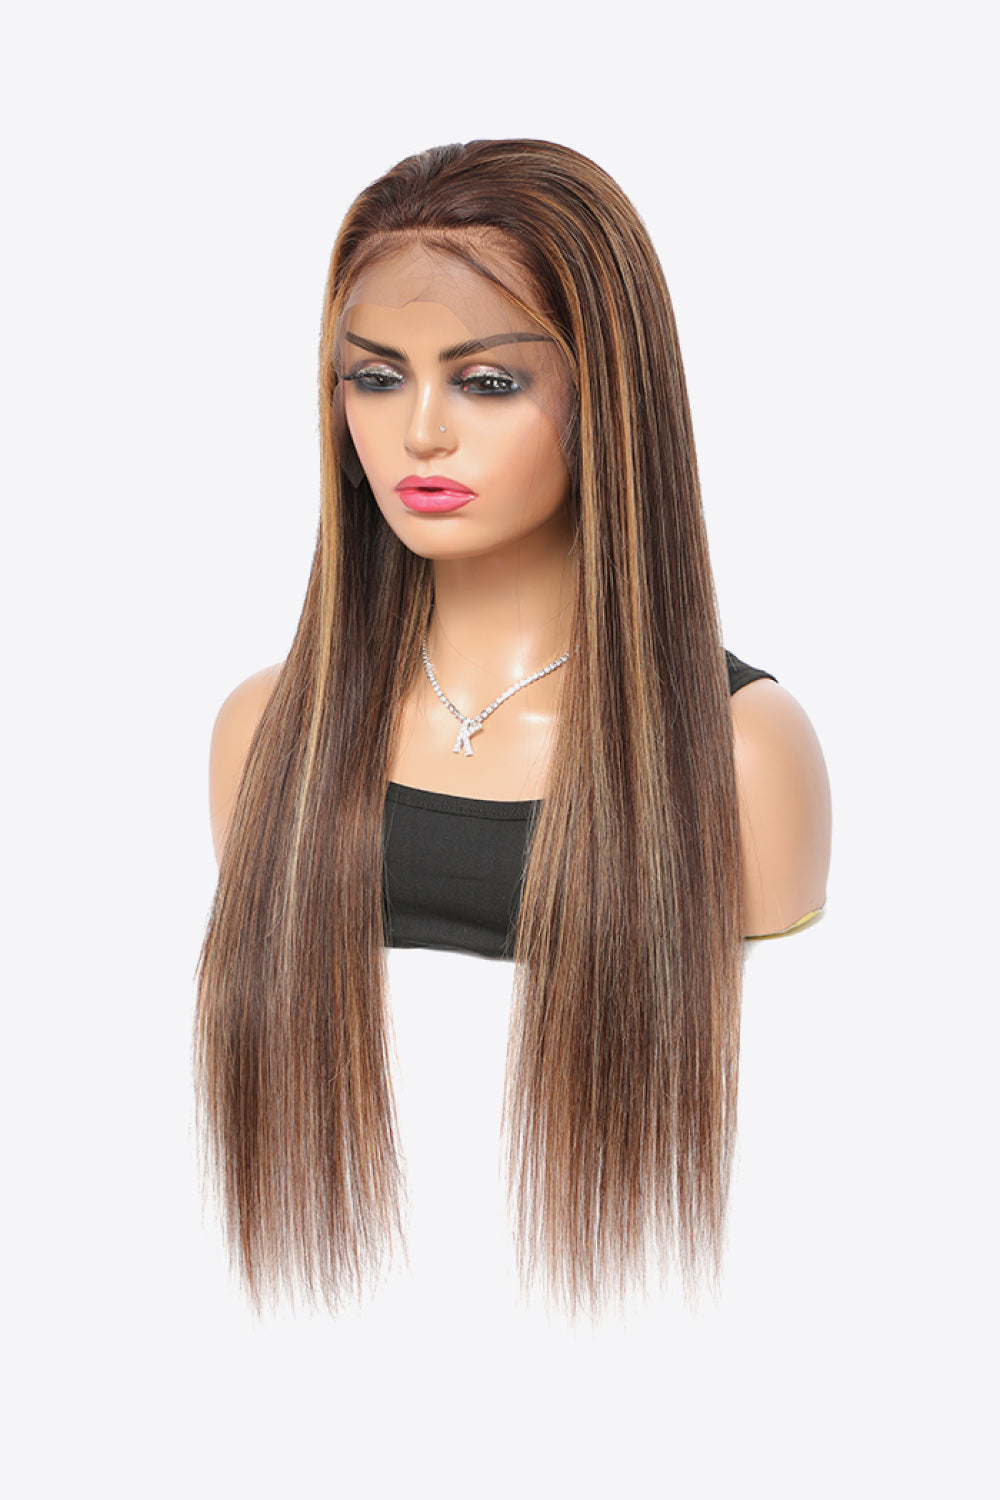 18" Highlight Ombre 13x4 Lace Front Wigs Human Virgin Hair 150% Density